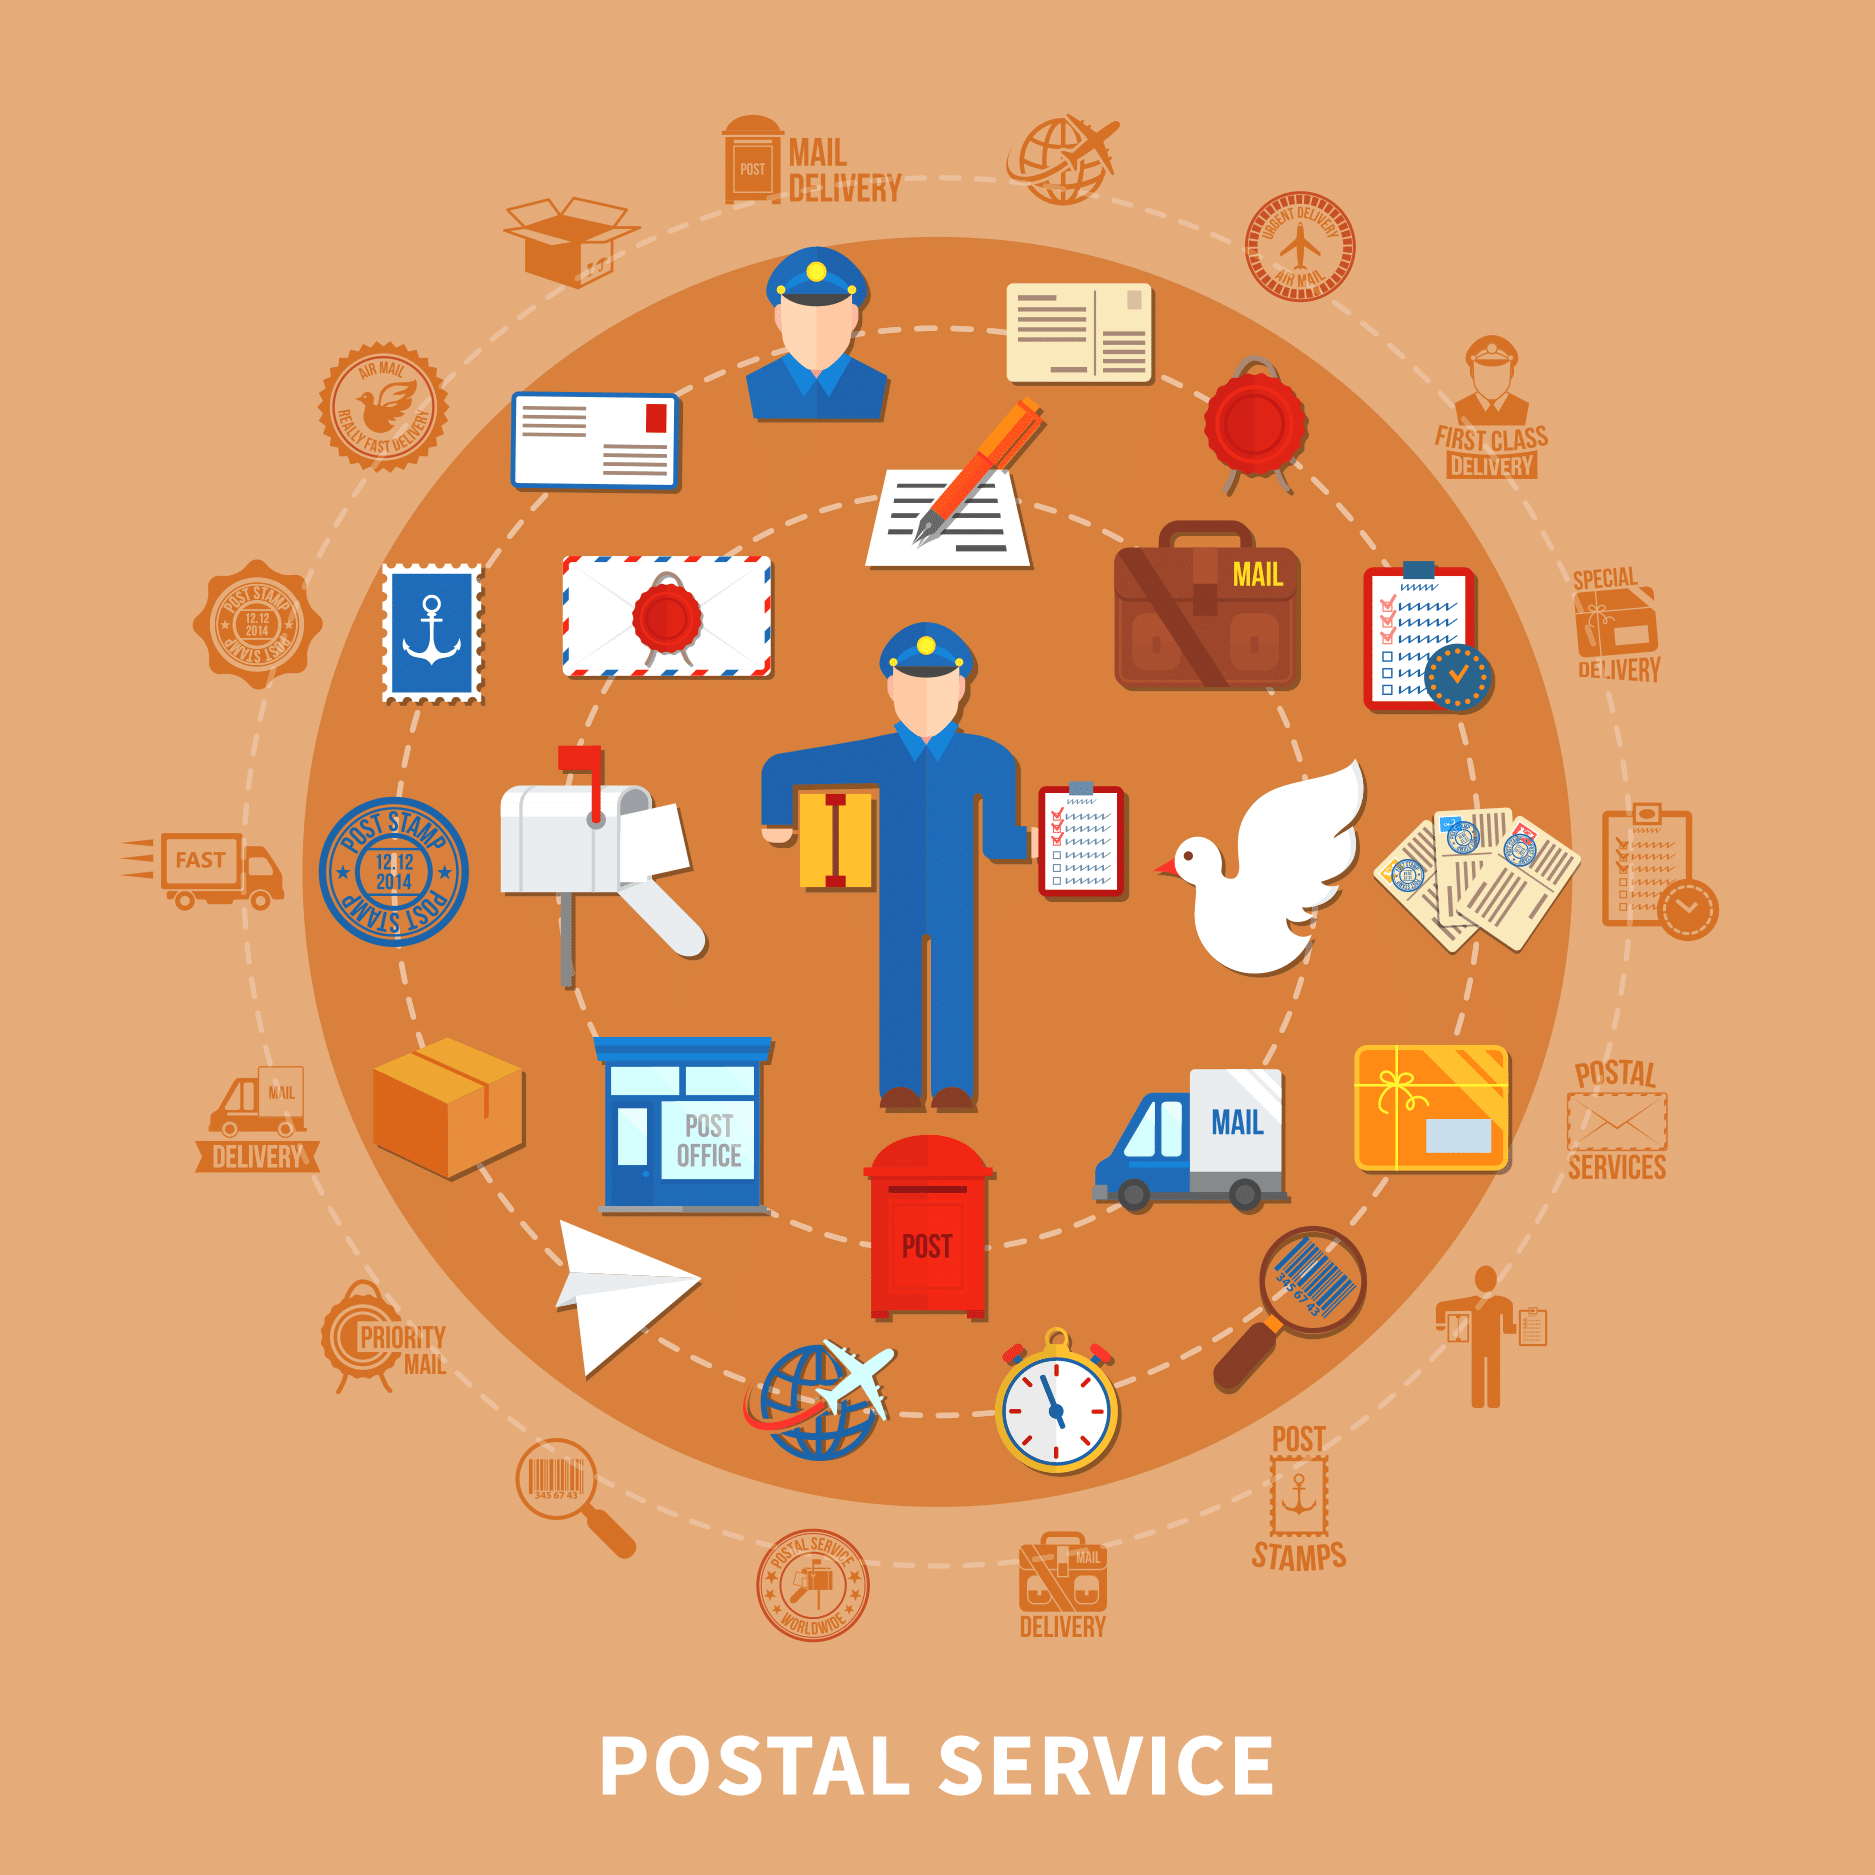 The Future of USPS